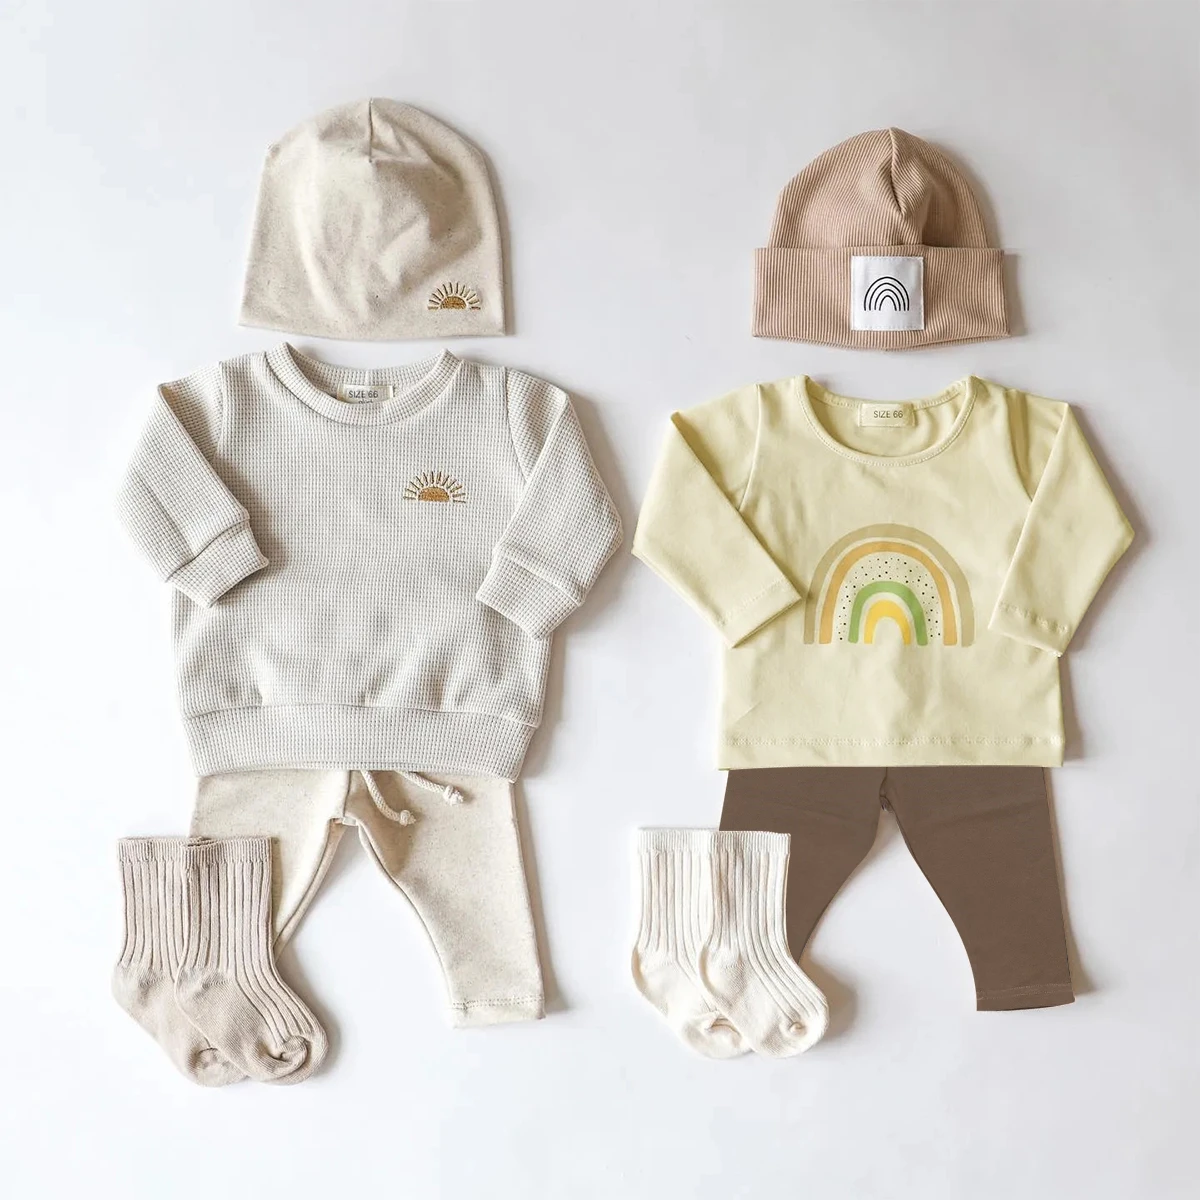 Newborn Baby Boy Clothes Set Toddler Baby Girl Soft Organic Cotton Casual Rainbow Tops Sweater+Leggings Trouser 2pcs Outfits New